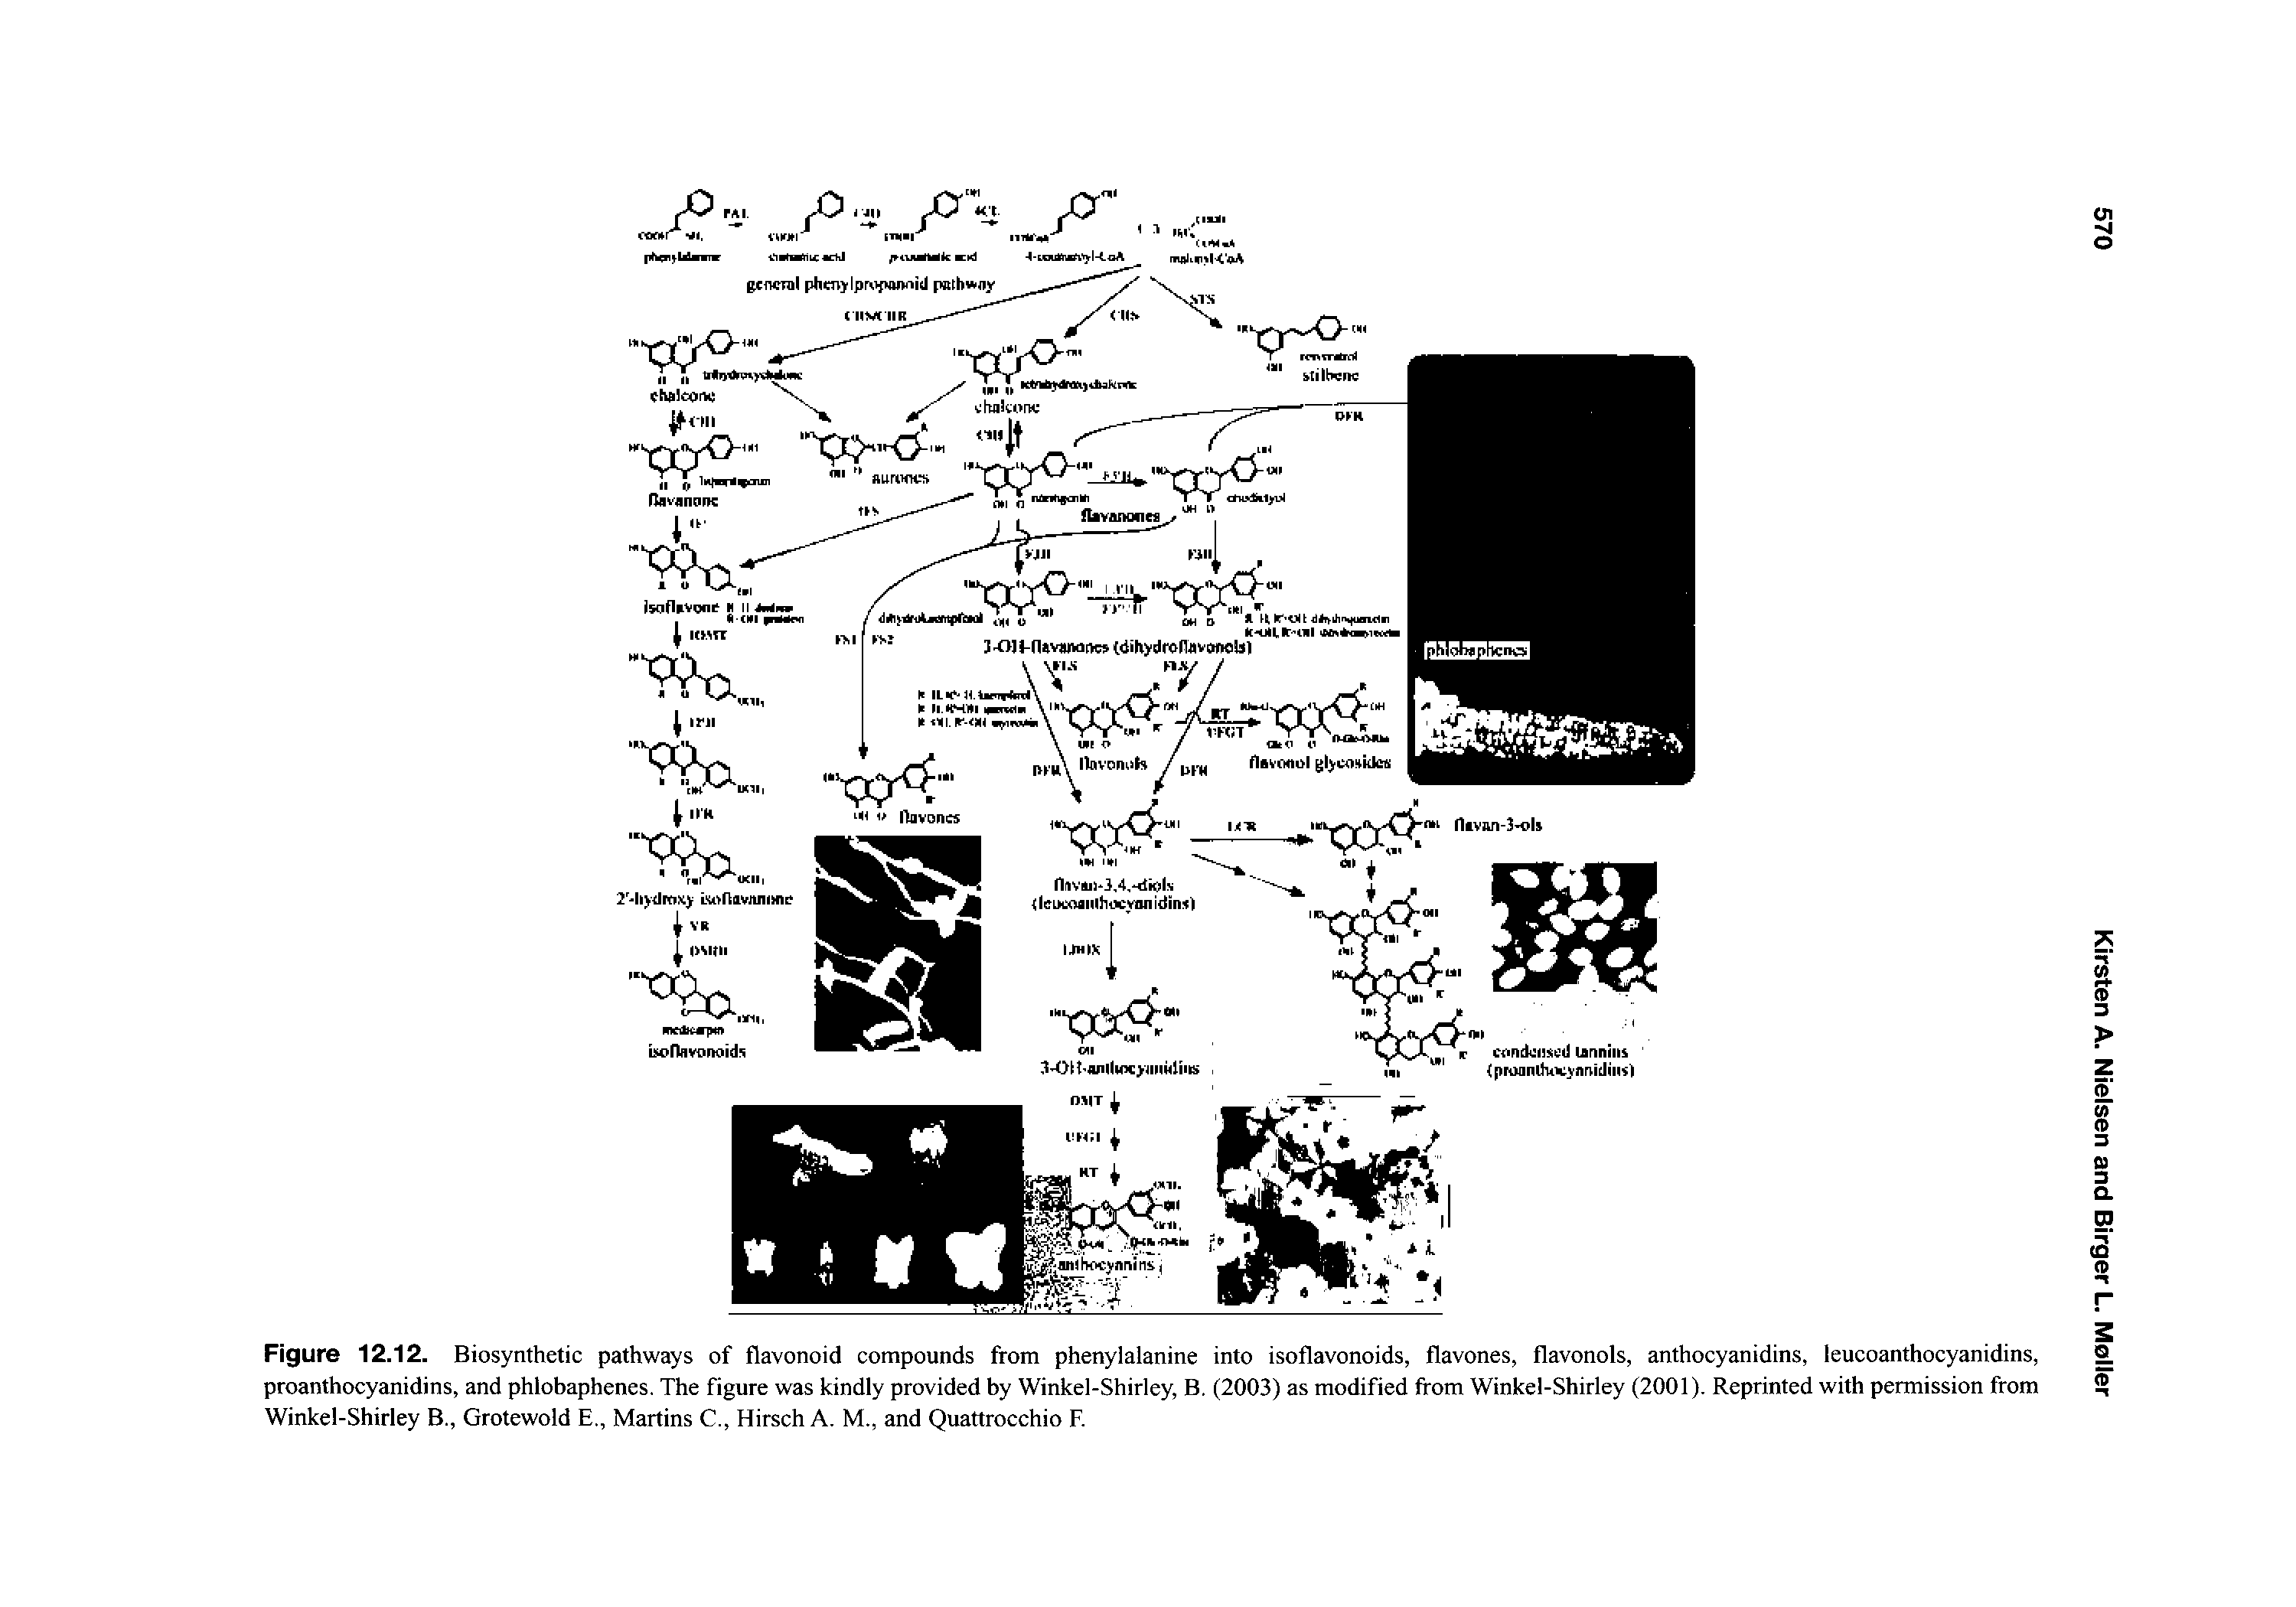 Figure 12.12. Biosynthetic pathways of flavonoid compounds from phenylalanine into isoflavonoids, flavones, flavonols, anthocyanidins, leucoanthocyanidins, proanthocyanidins, and phlobaphenes. The figure was kindly provided by Winkel-Shirley, B. (2003) as modified from Winkel-Shirley (2001). Reprinted with permission from Winkel-Shirley B., Grotewold E., Martins C., Hirsch A. M., and Quattrocchio E...